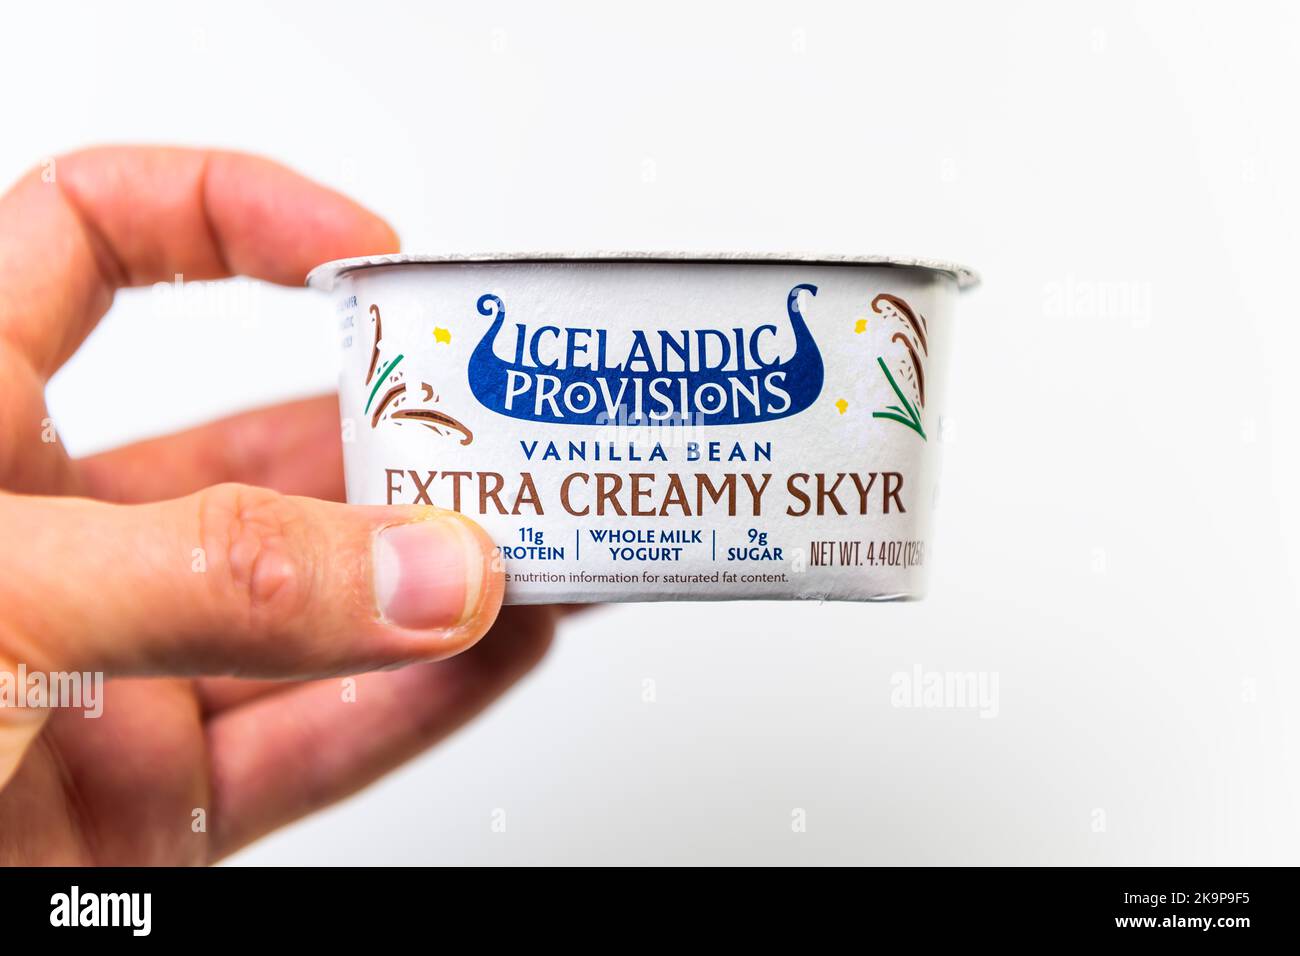 Naples, USA - October 21, 2021: Product label for Icelandic Provisions extra creamy skyr yogurt traditional food in Iceland made with vanilla beans Stock Photo